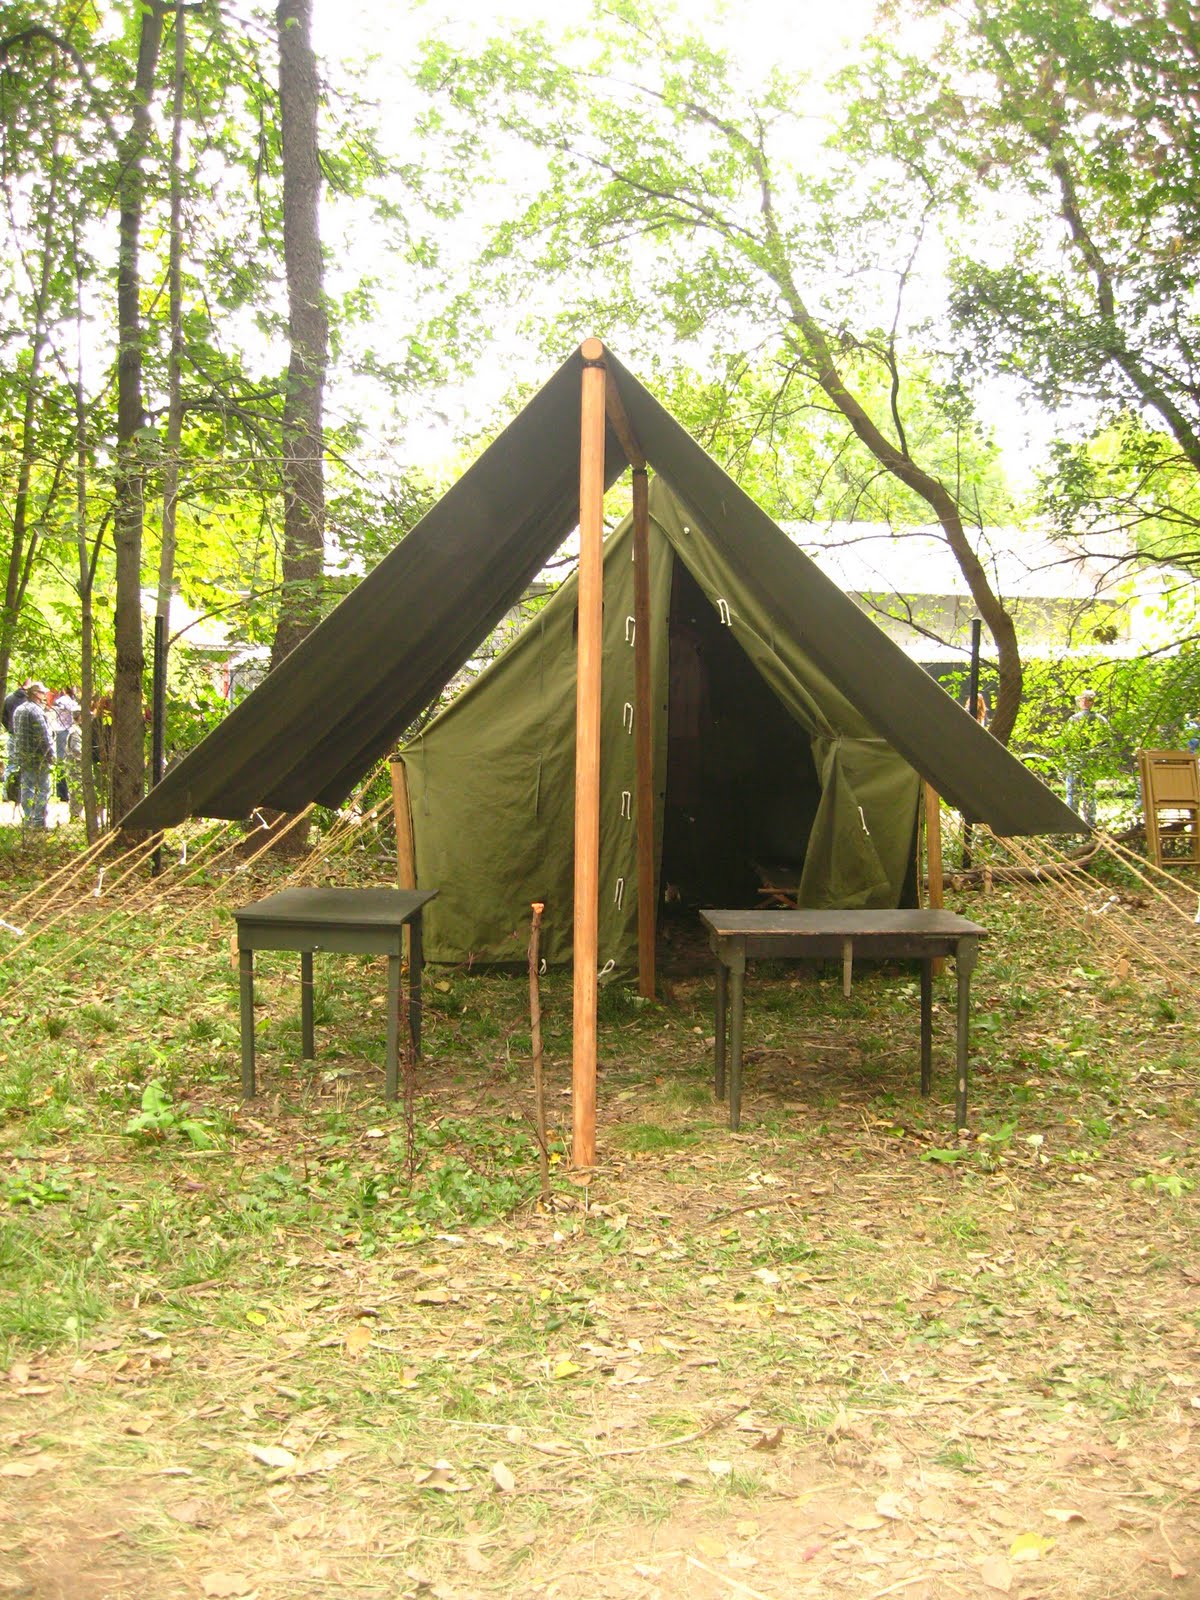 World War II (WWII) Small Wall Tent, with Small Fly Up Front